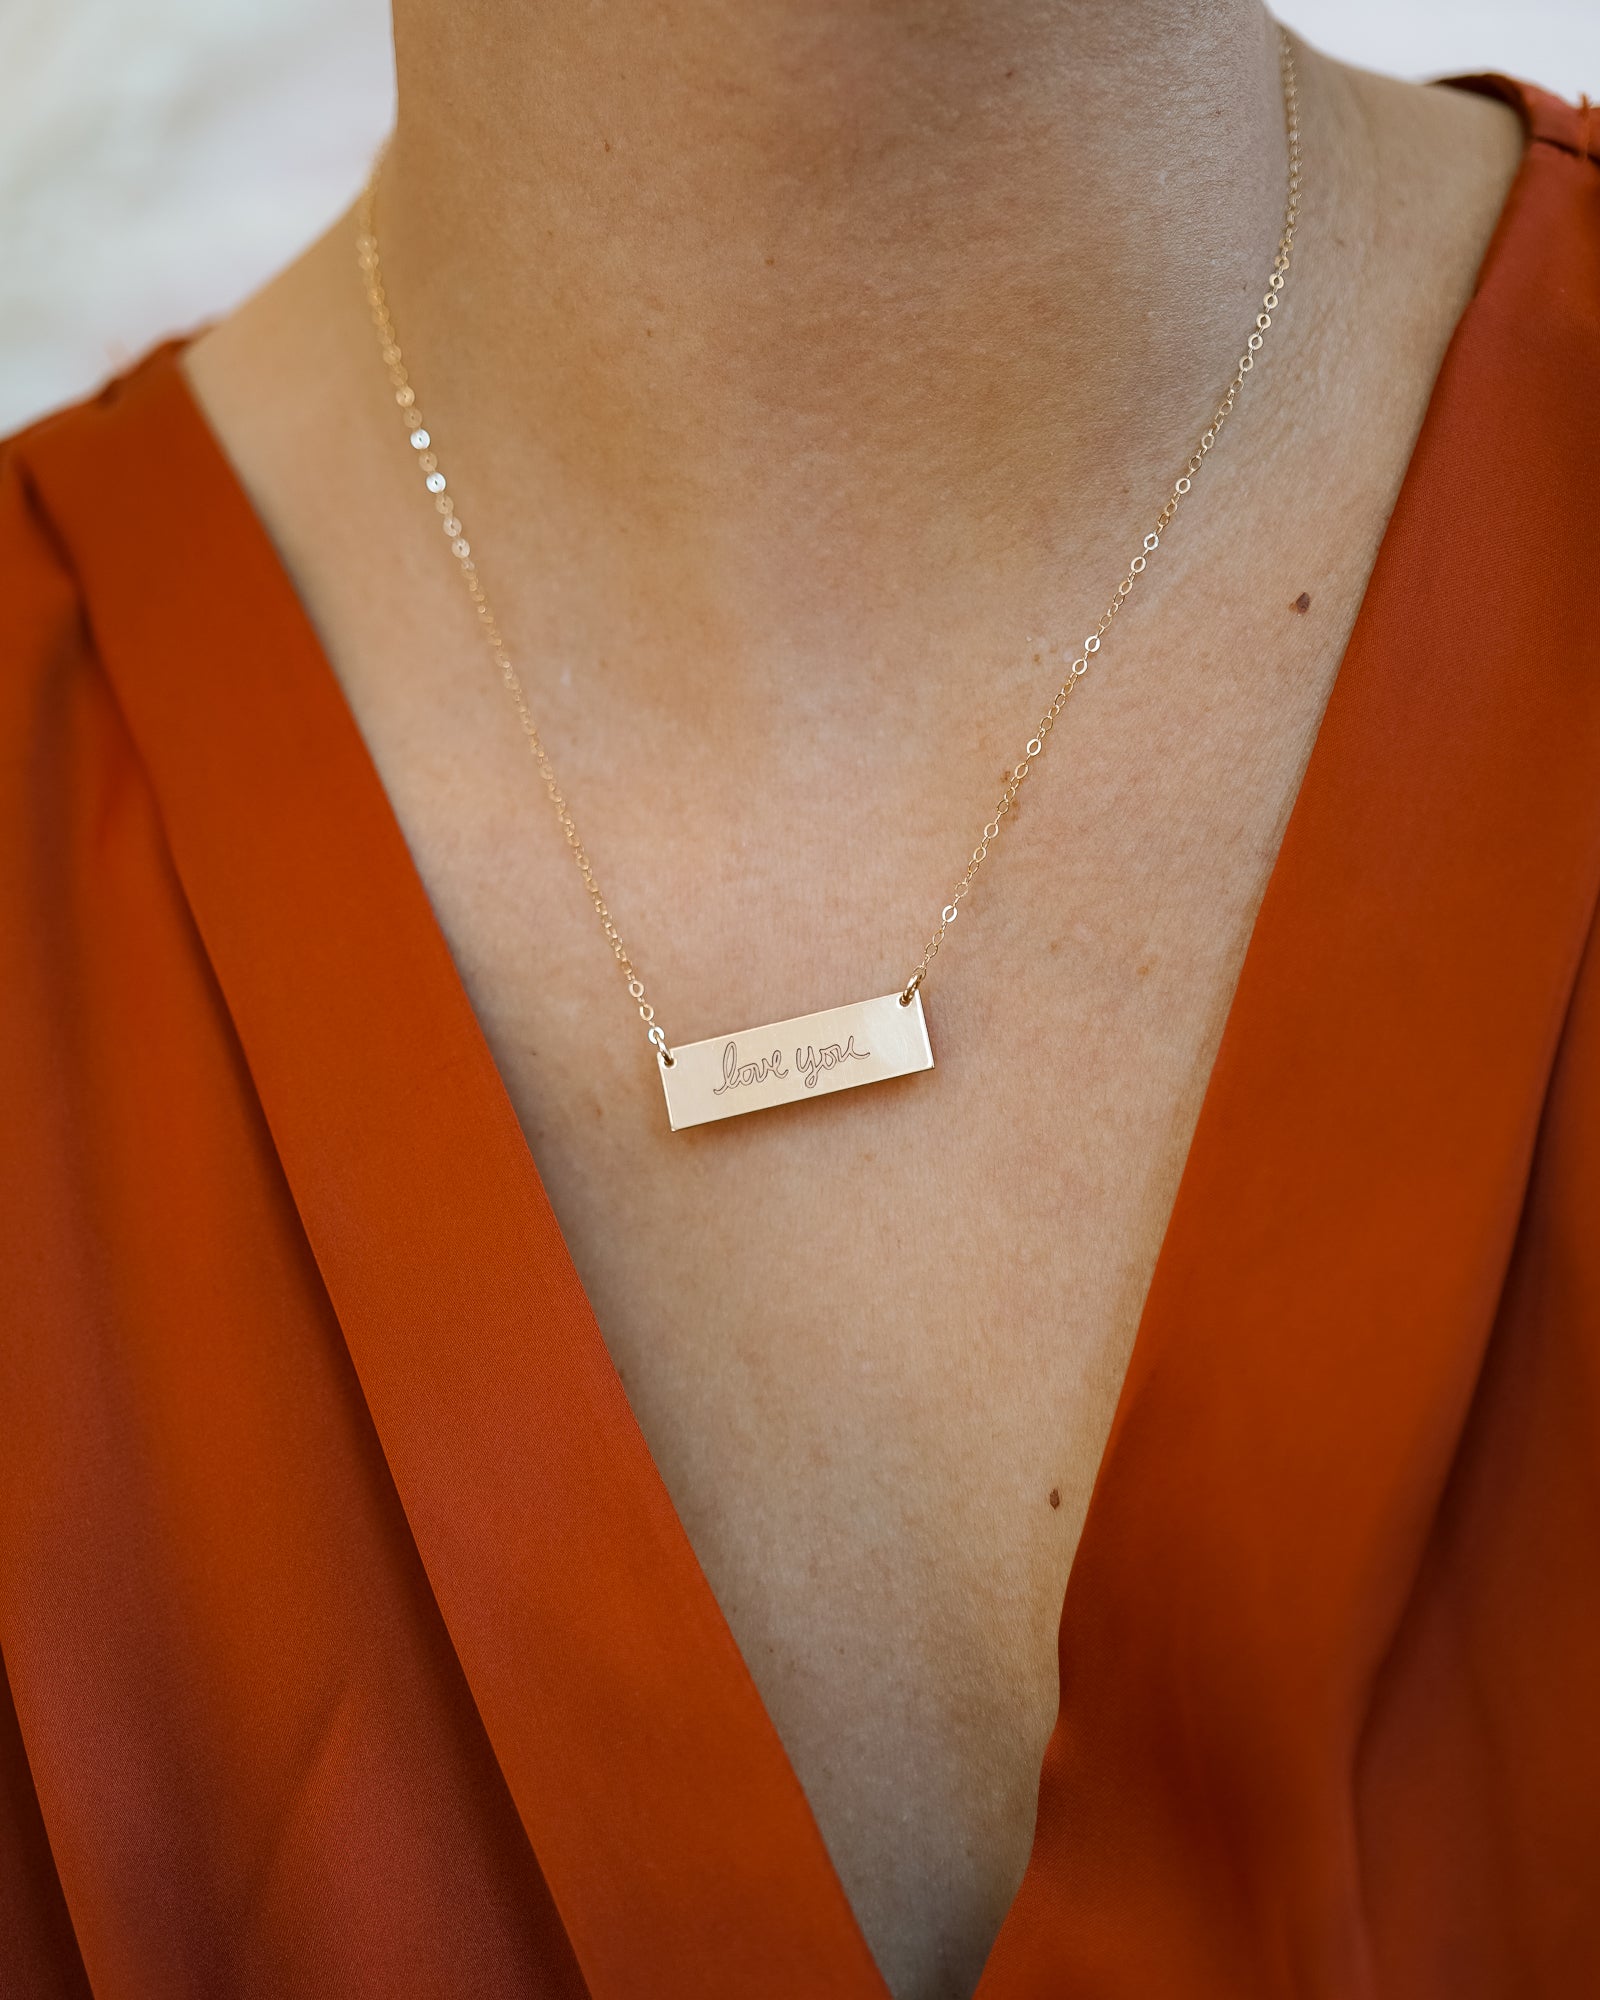 Awesome Personalized Idea! Personalized Bar Necklace, Bar Necklace, Engraved  Necklace, Engravable Neck… | Bar necklace personalized, Engraved necklace,  Bar necklace